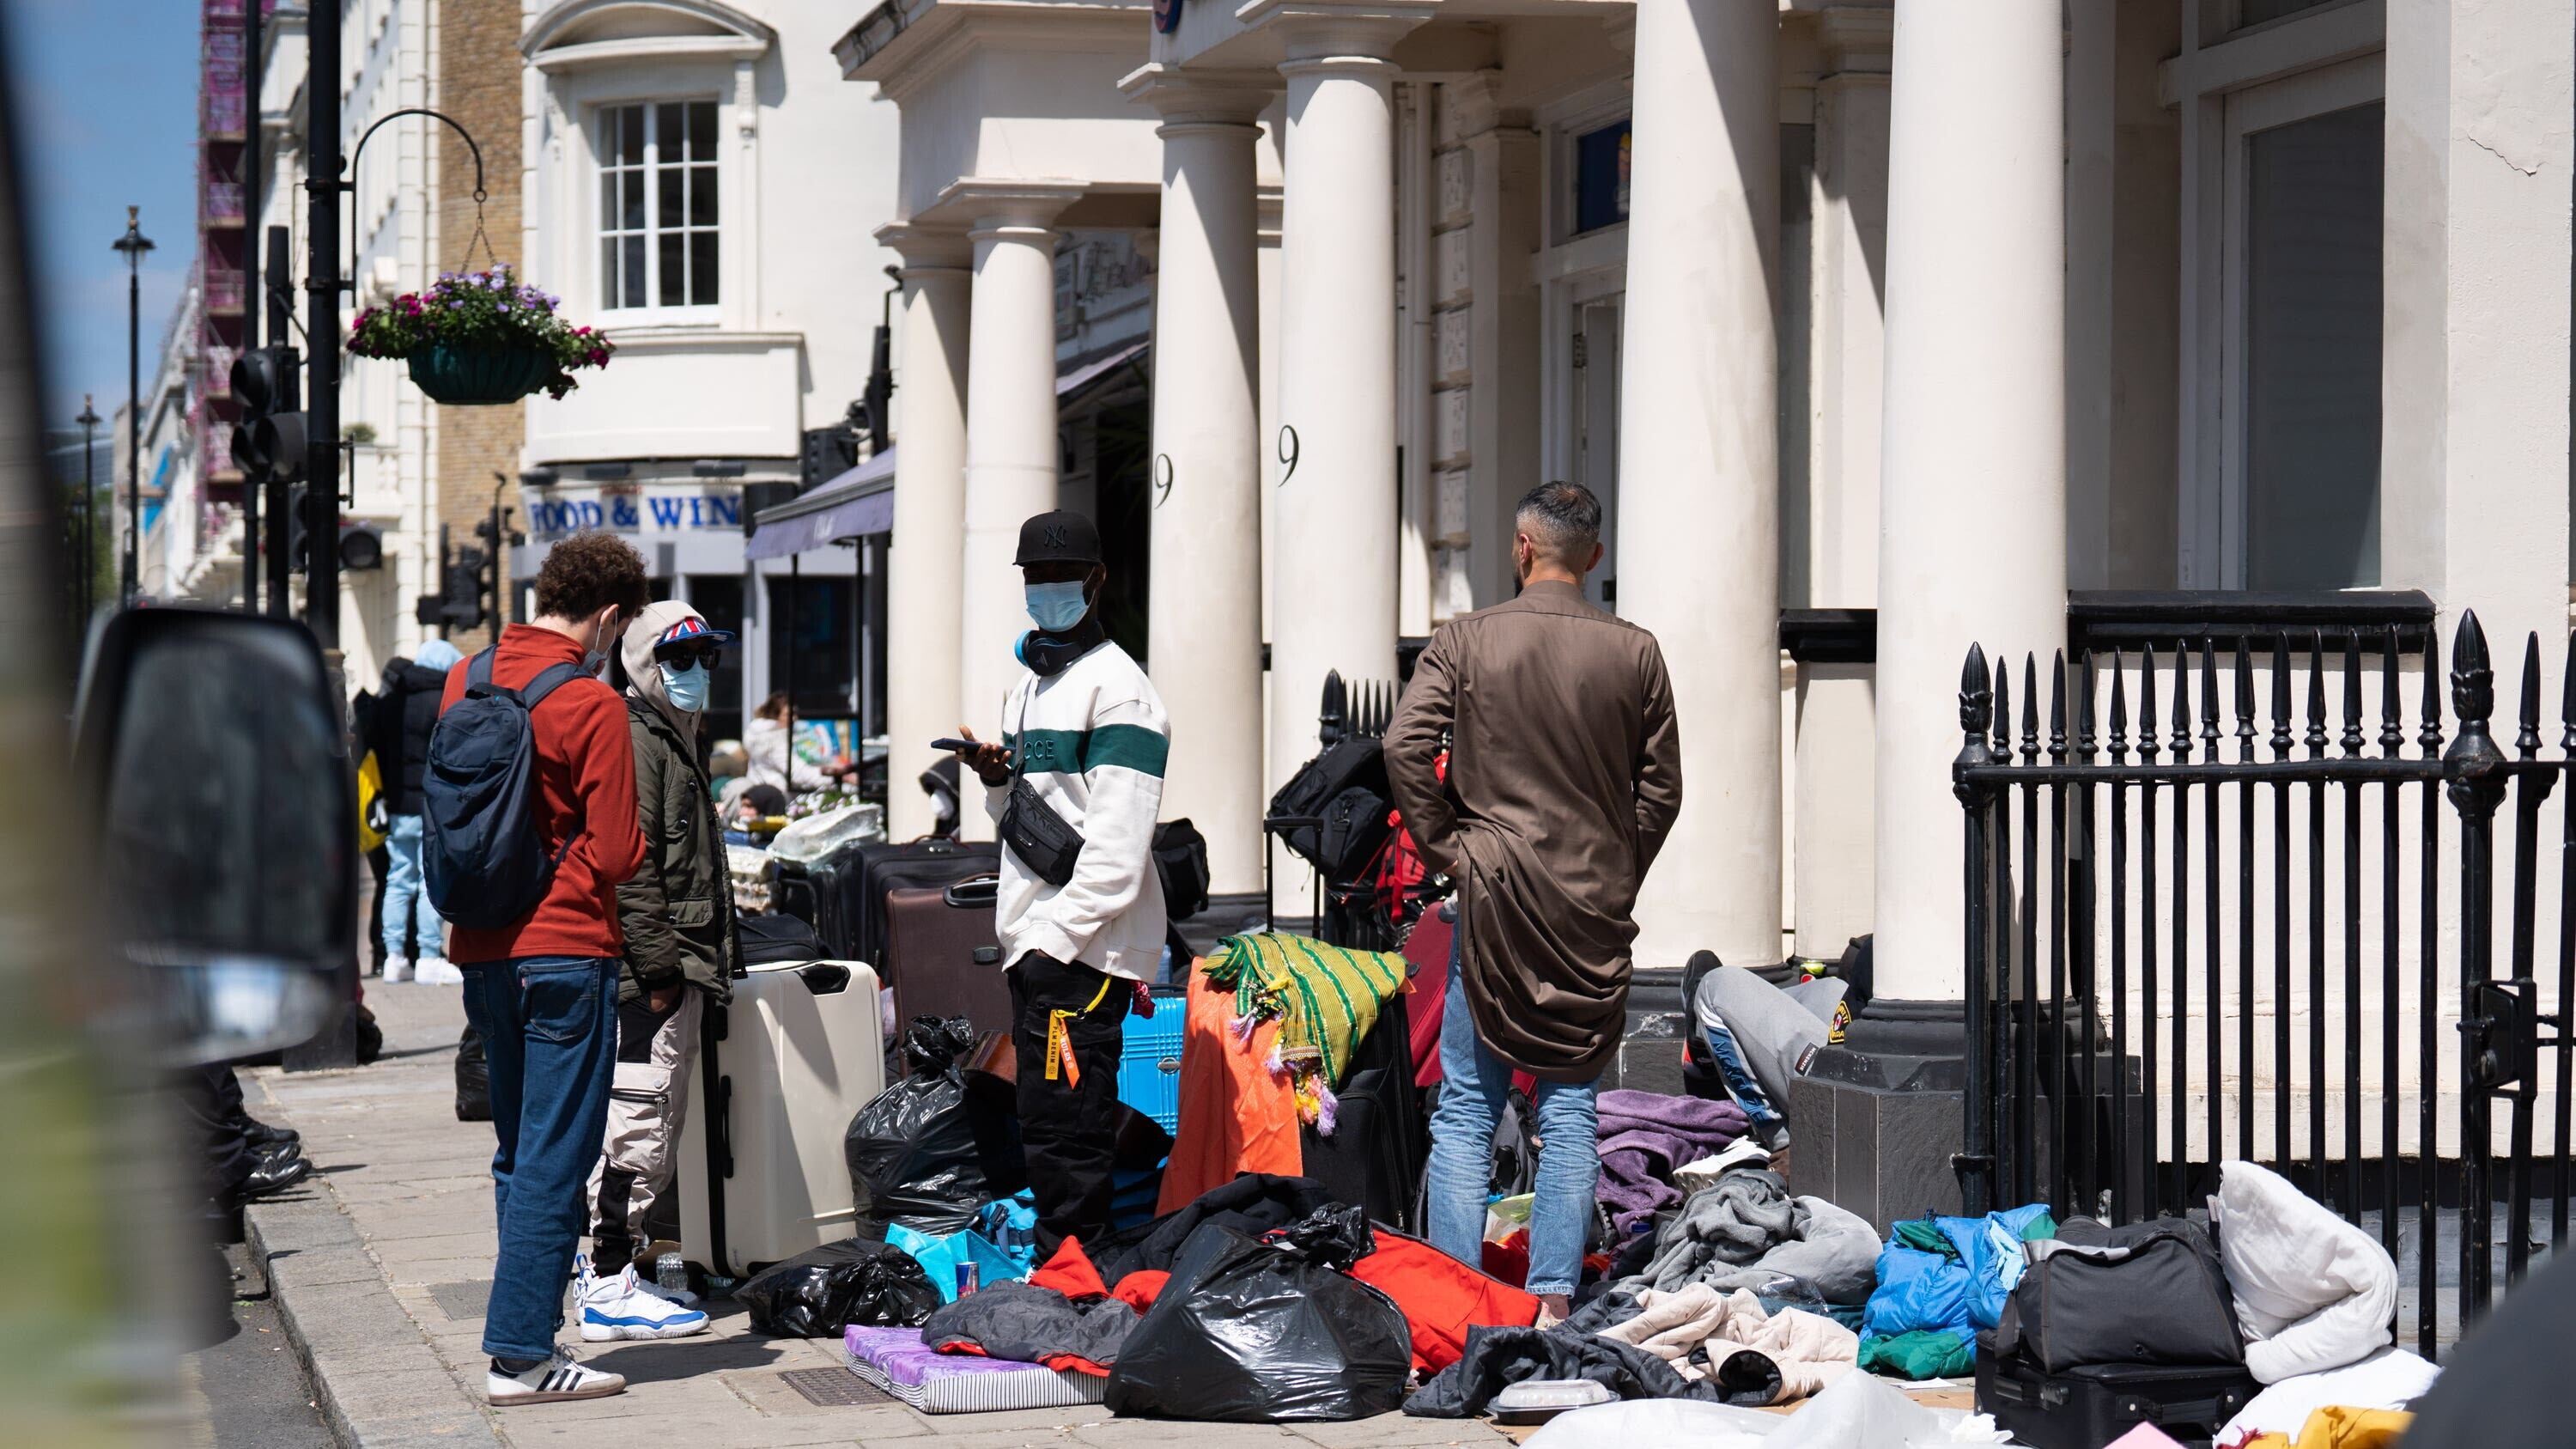 Migrant hotels are costing the Home Office around £8m per day according to the department’s accounts (James Manning/PA)